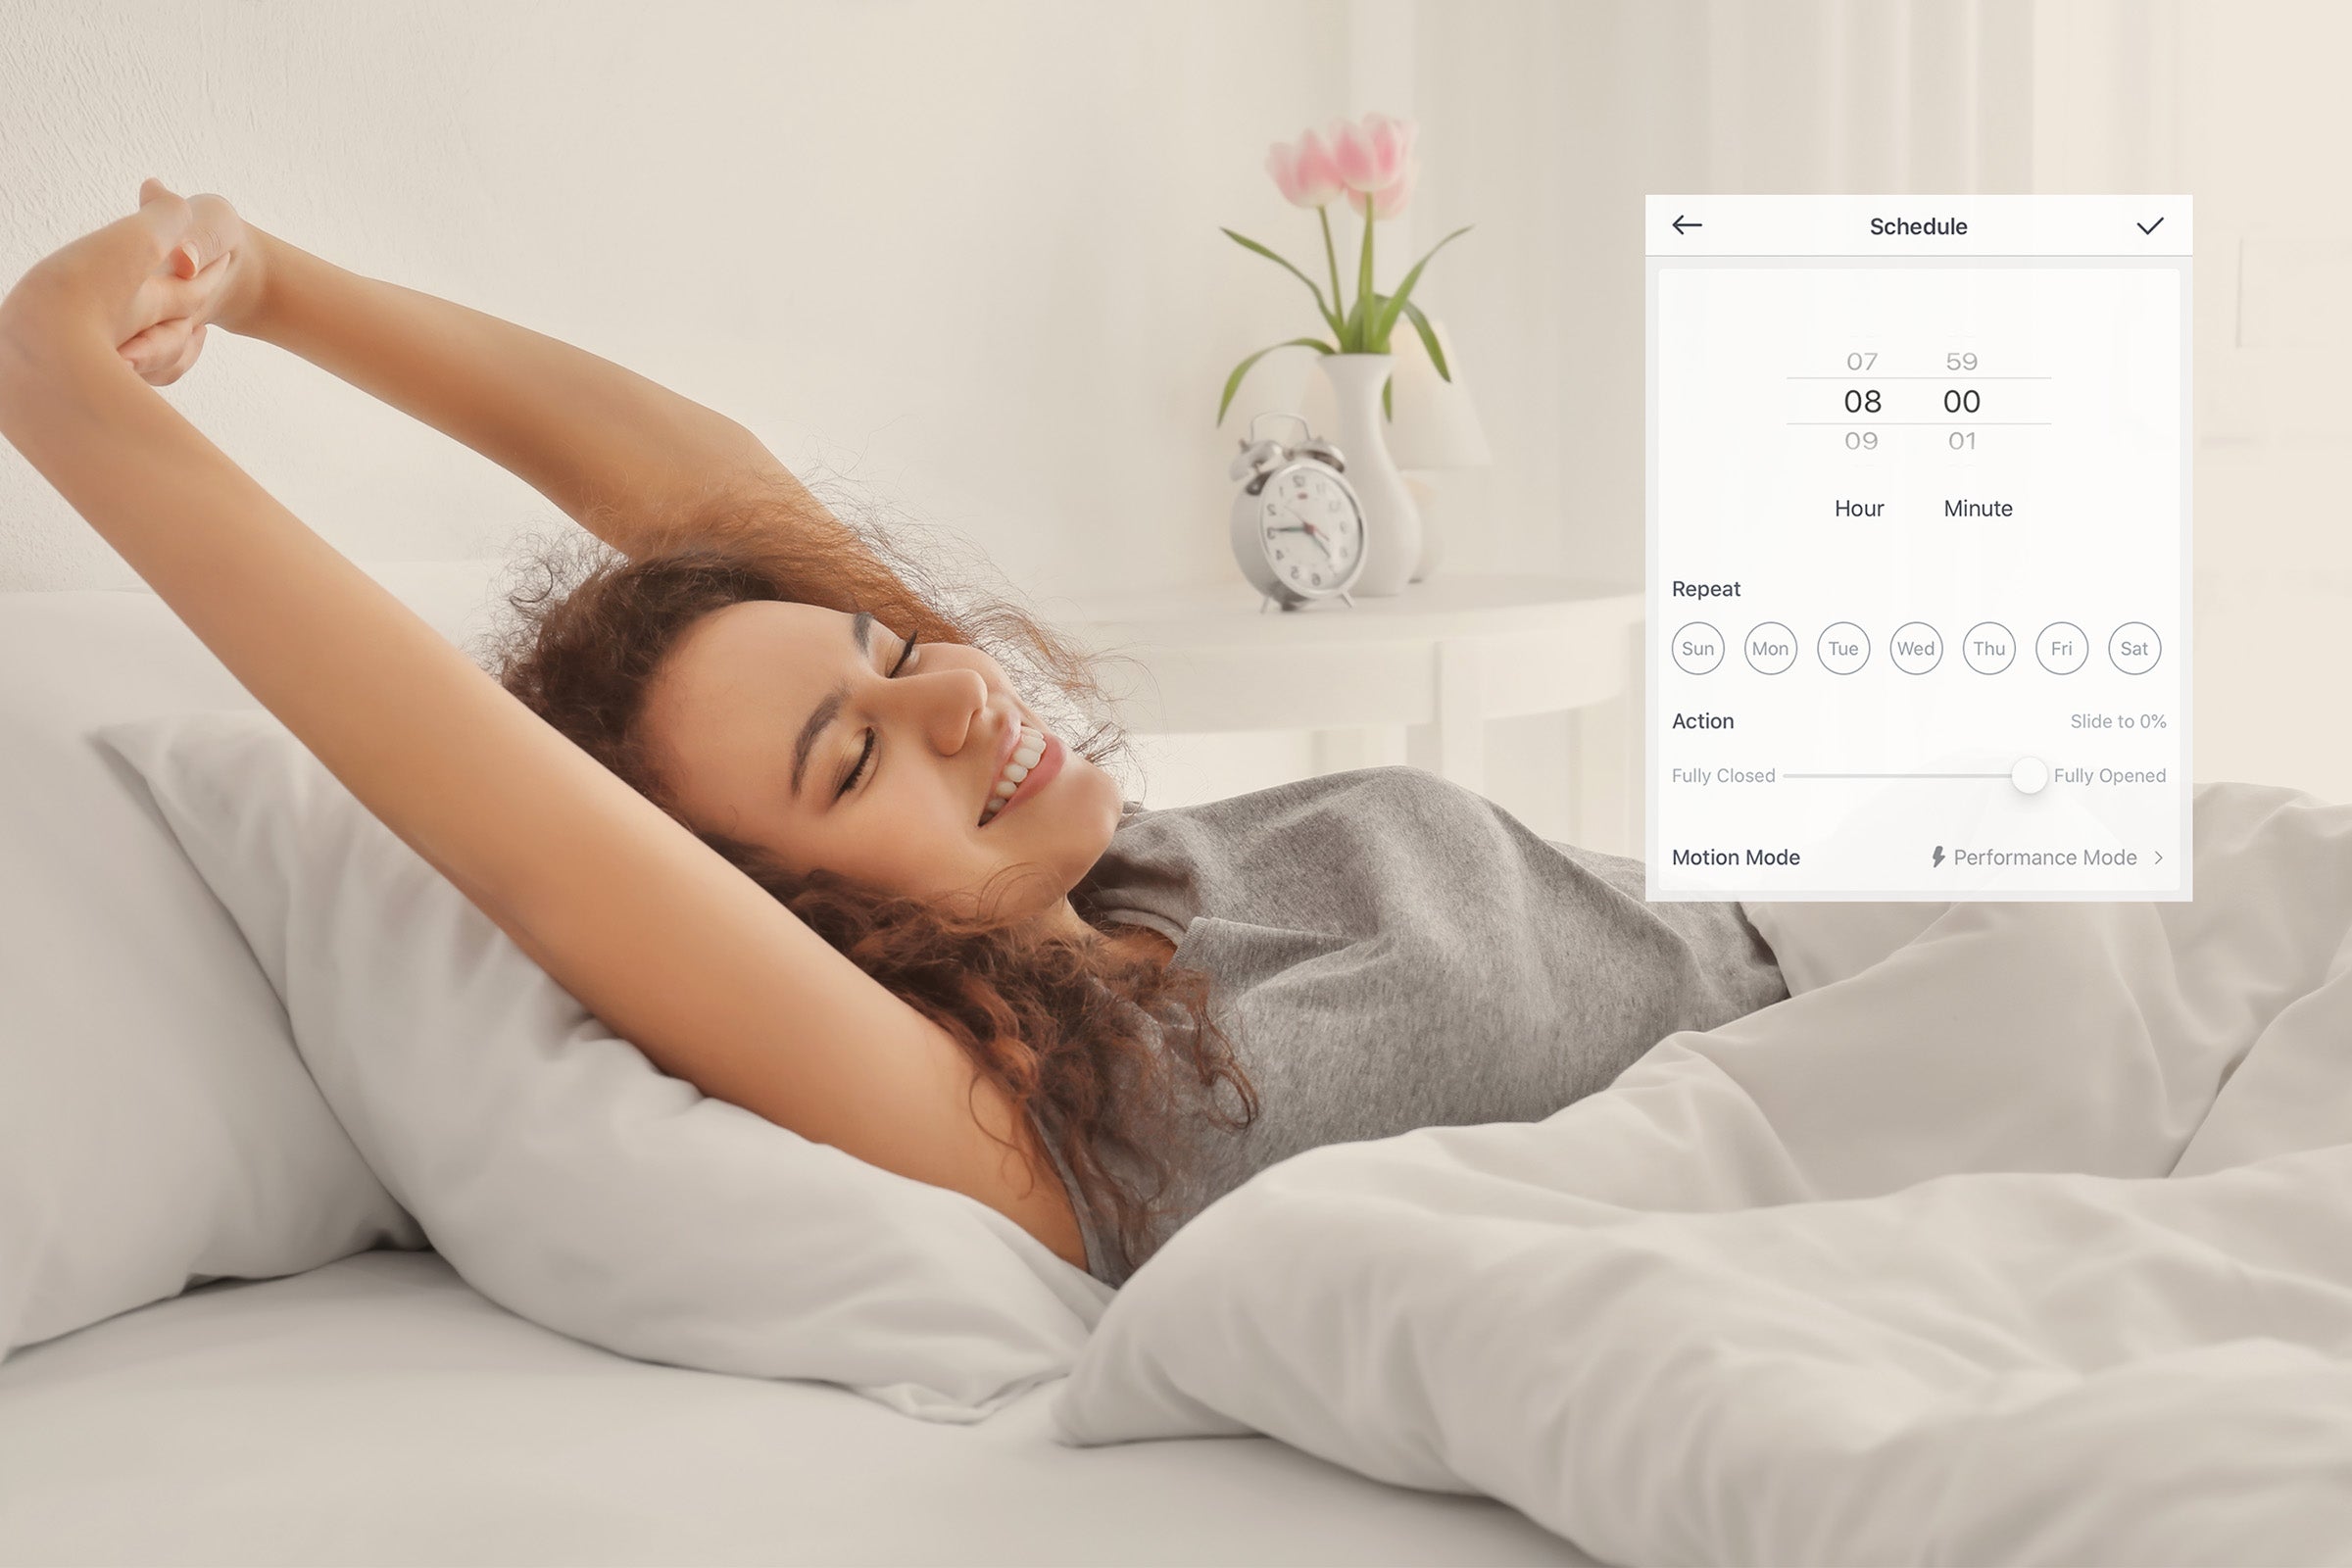 Struggling with the alarms in weekdays’ morning? Let the SwitchBot Curtain save you. Set up a schedule on your phone, your curtains will be automatically opened before your alarm goes off.